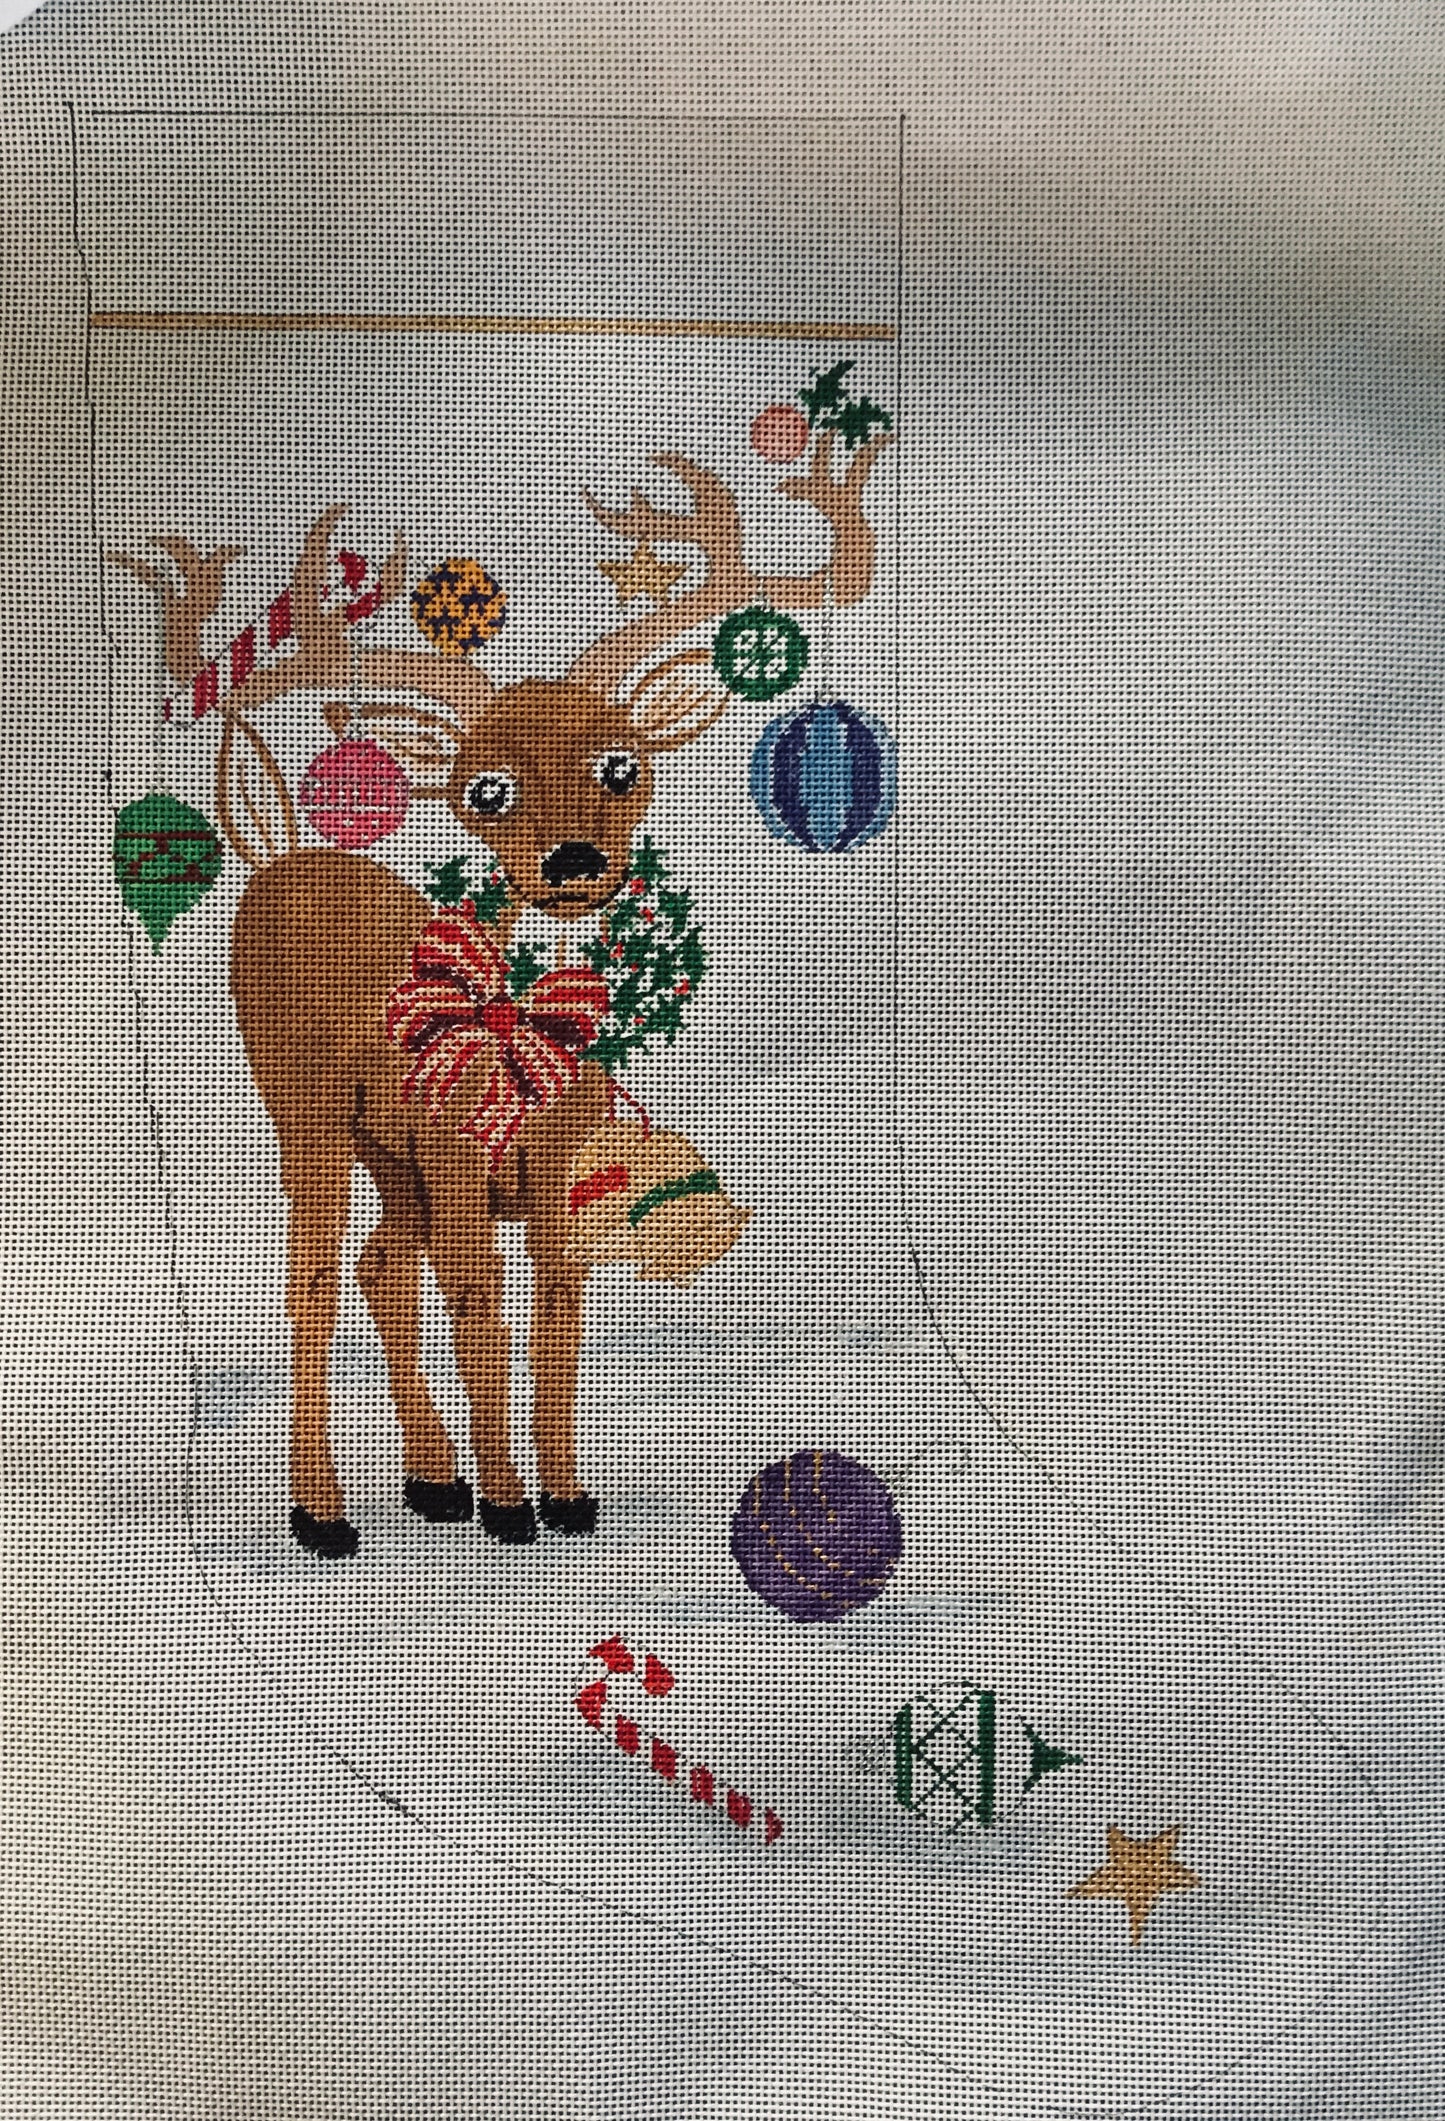 Deer with ornaments stocking